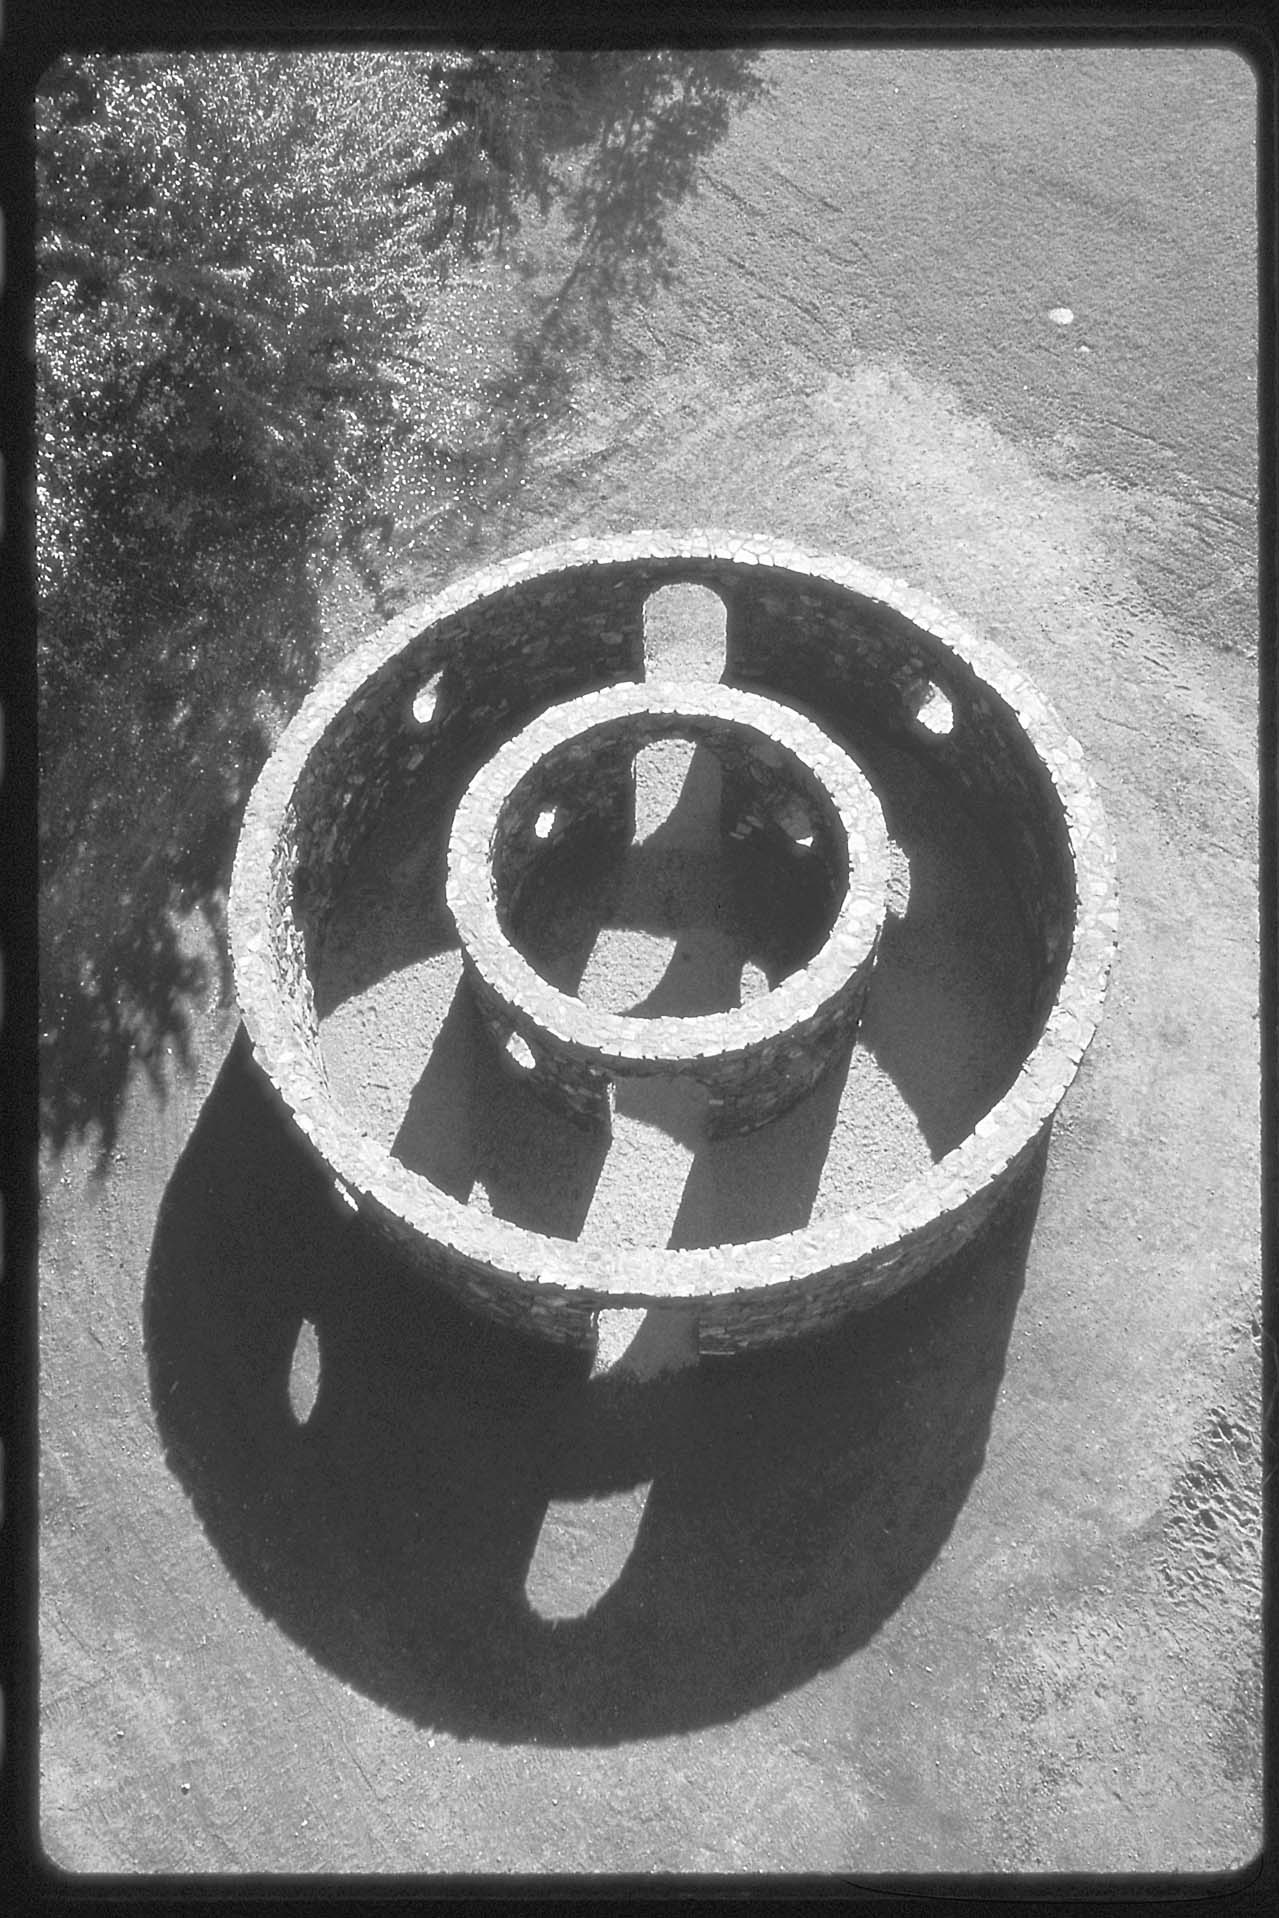 aerial view of two concentric rings of masonry. angled light reveals shadows of circular openings on the ground adjacent. Black and white photo.